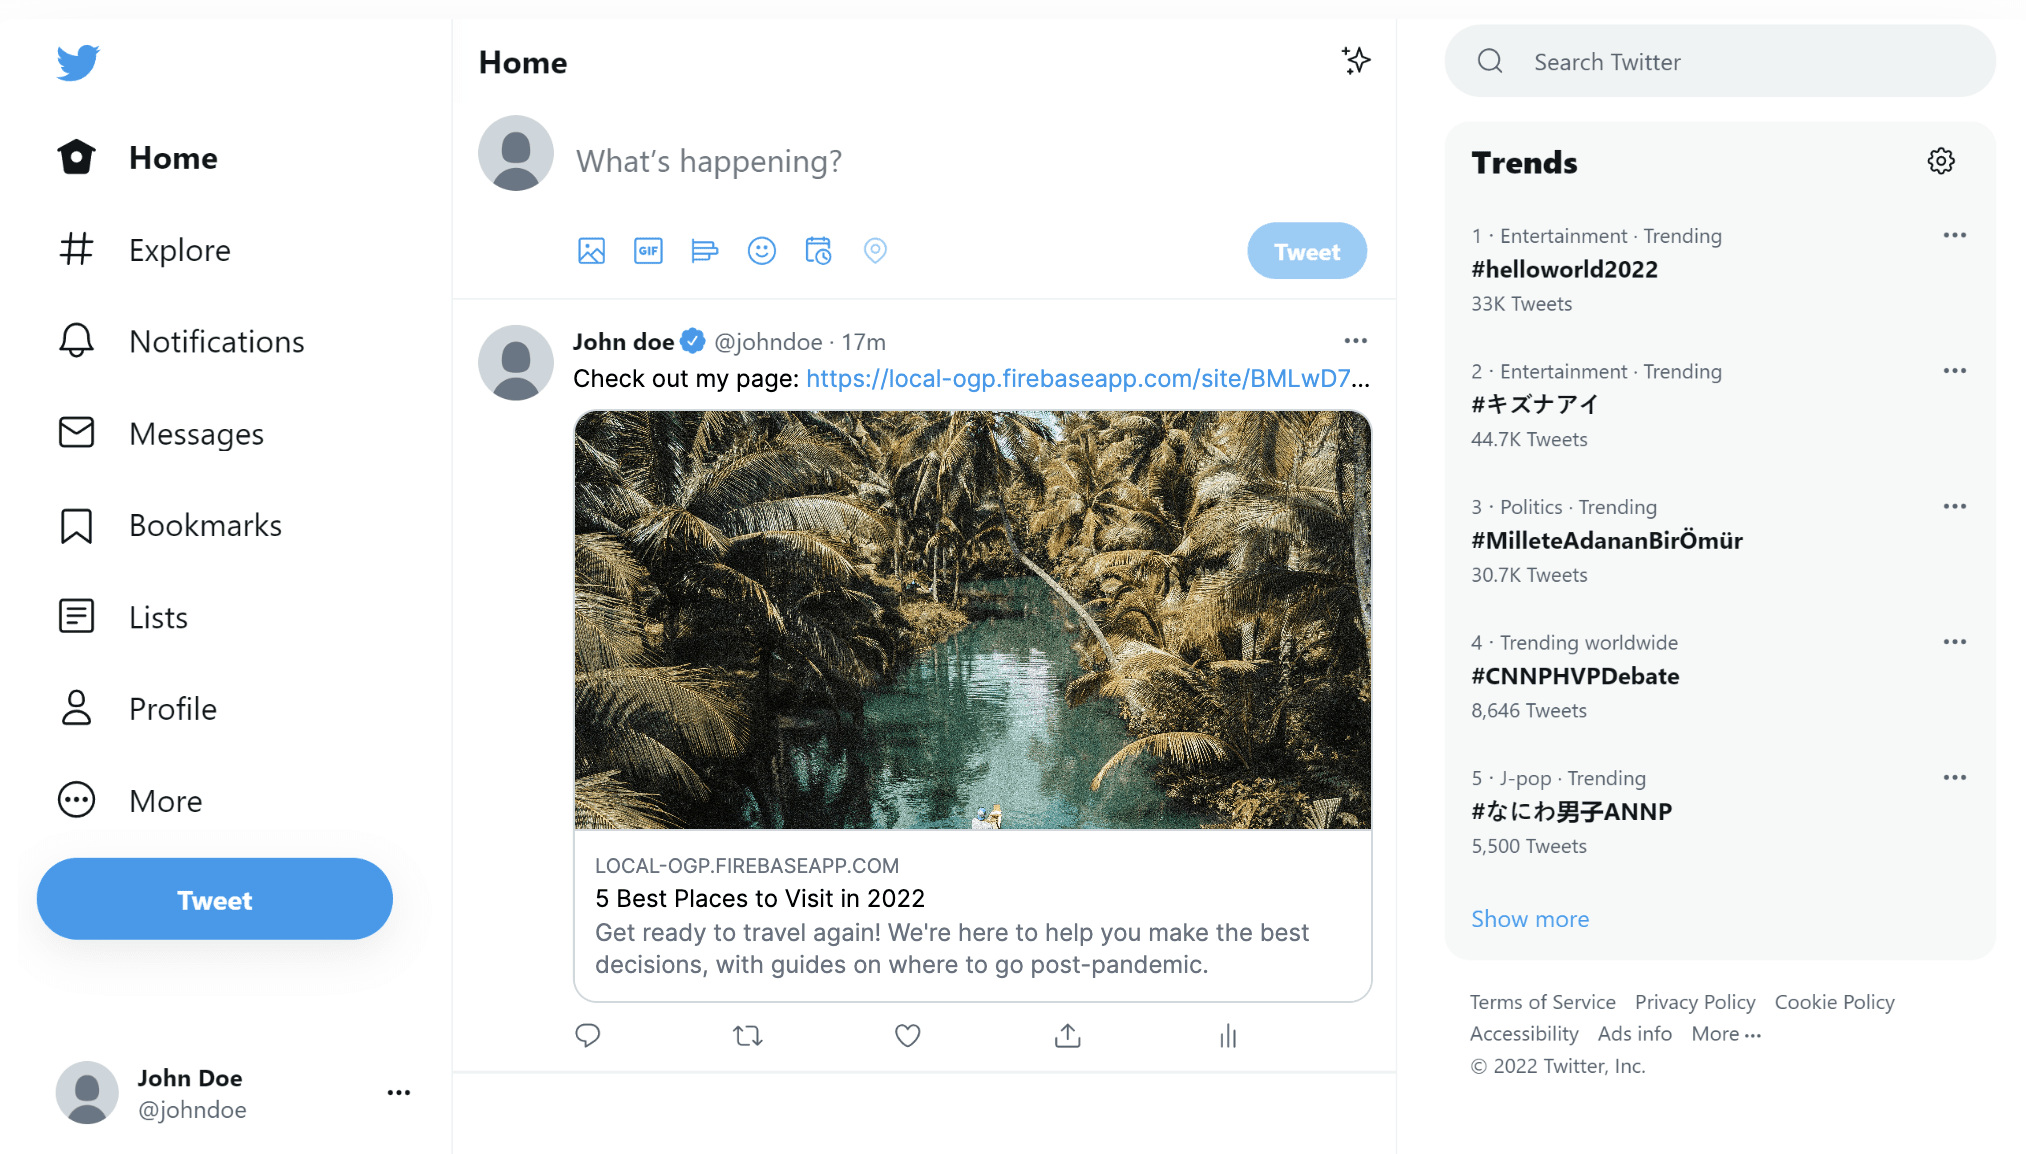 screenshot of the preview/Open Graph image on Twitter